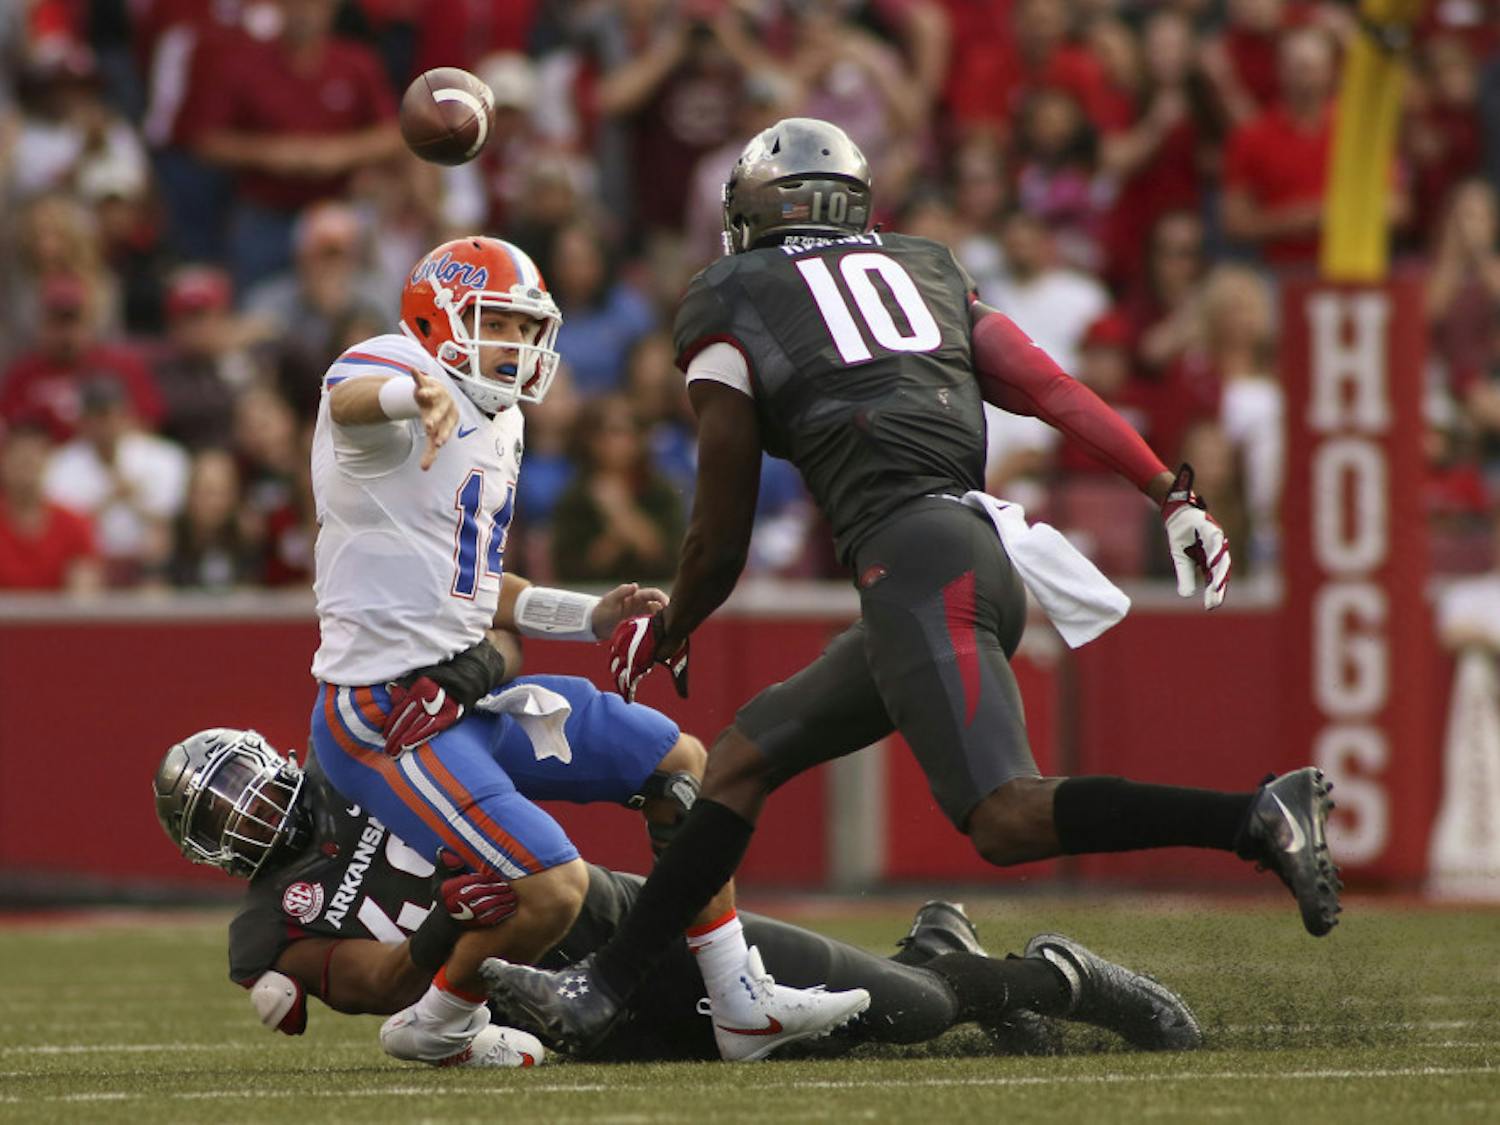 Florida's Luke Del Rio (14) looses the ball before being taken down by Arkansas' Deatrich Wise Jr. (48) and Randy Ramsey (10) during the second half of an NCAA college football game on Nov. 5, 2016 in Fayetteville, Arkansas. Arkansas beat Florida 31-10. (AP Photo/Samantha Baker)